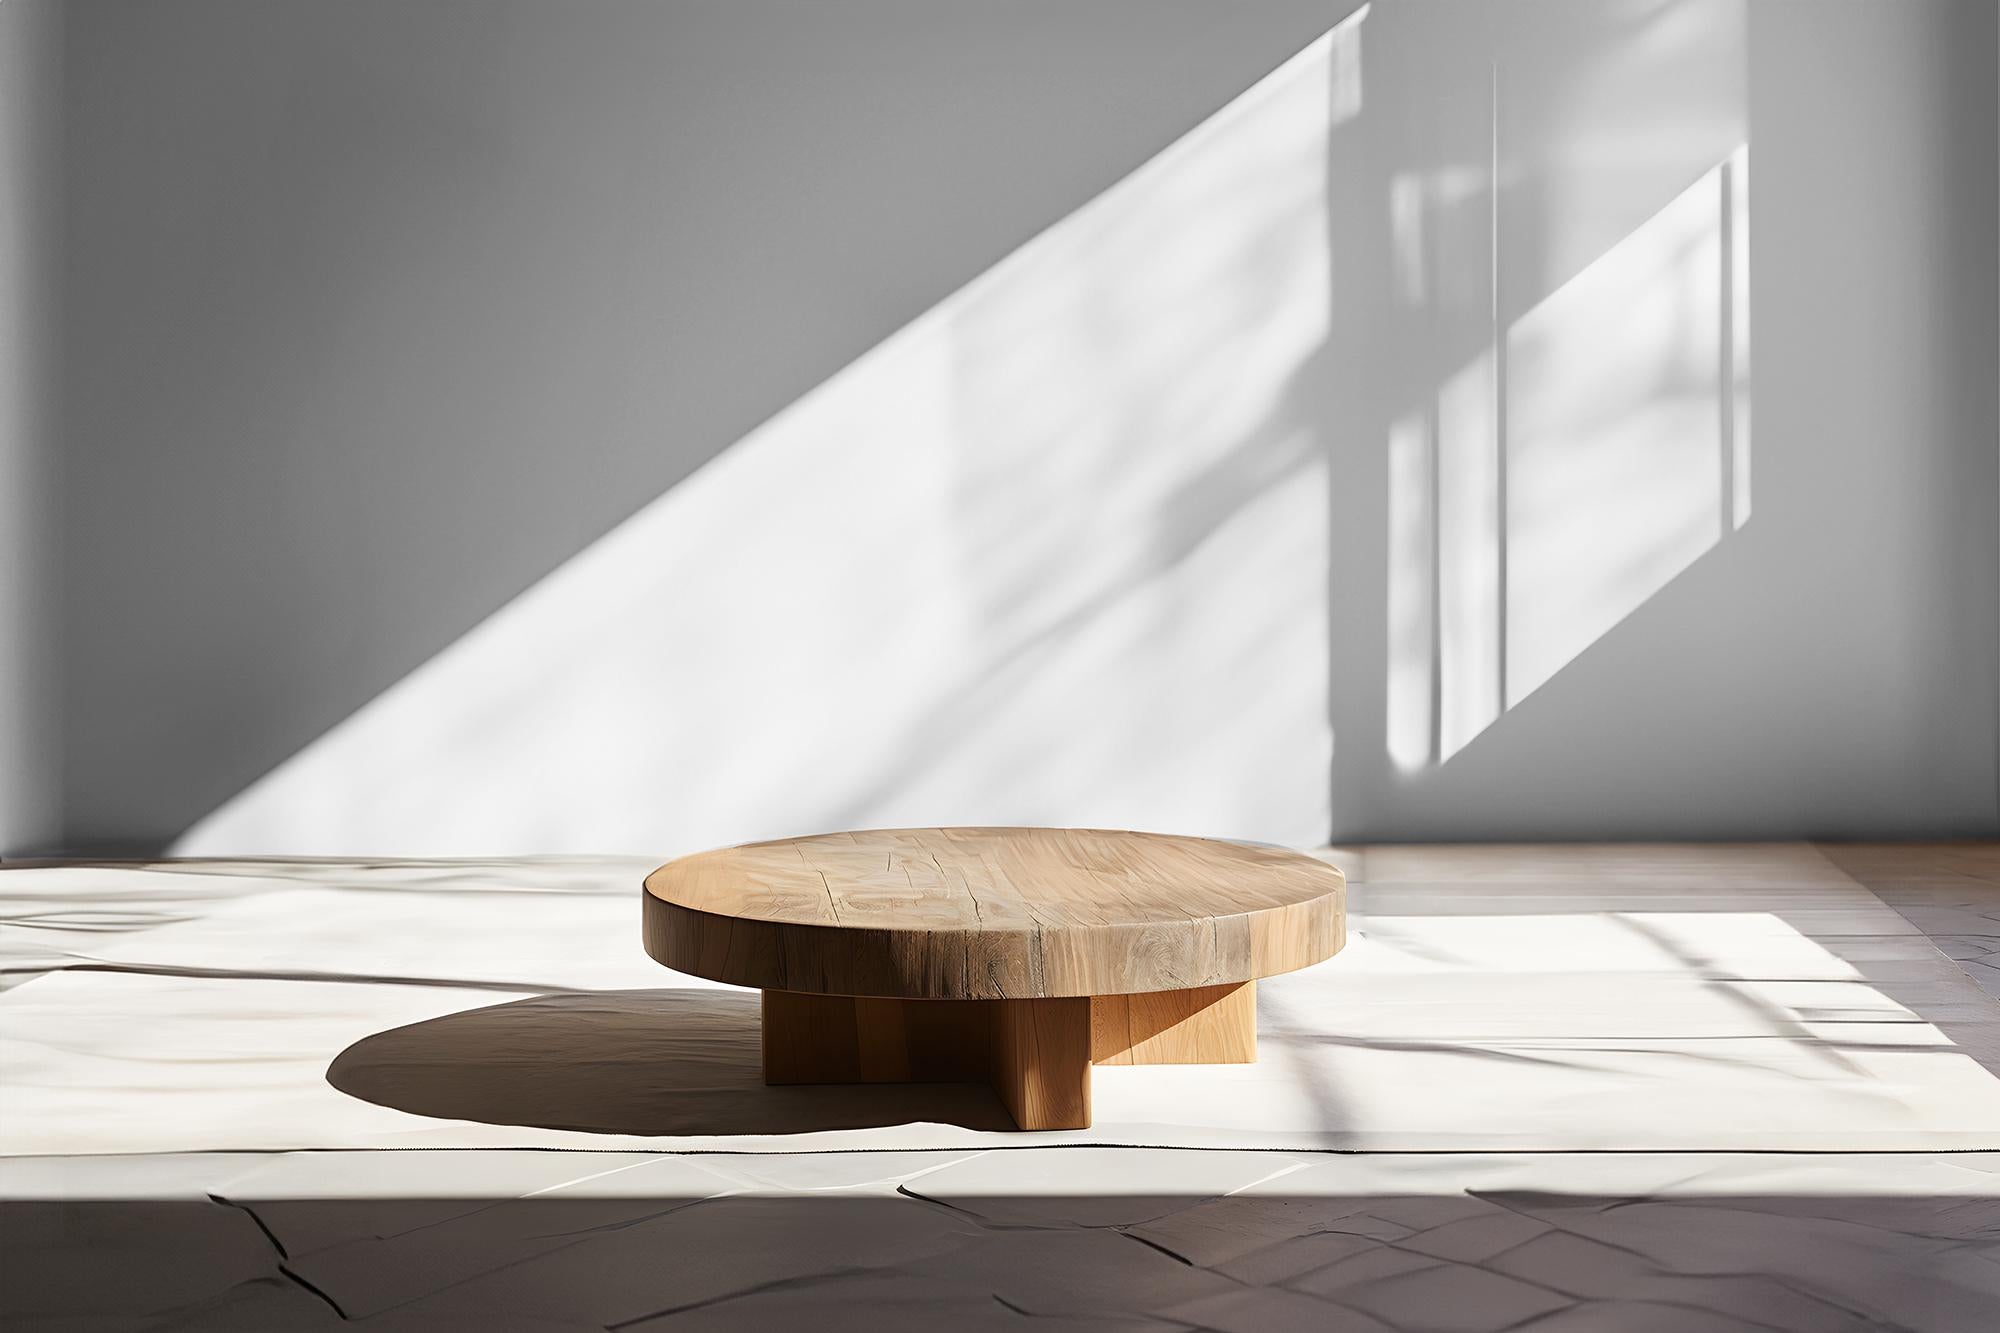 Elegant Round Coffee Table - Understated Design Fundamenta 44 by NONO

Sculptural coffee table made of solid wood with a natural water-based or black tinted finish. Due to the nature of the production process, each piece may vary in grain, texture,